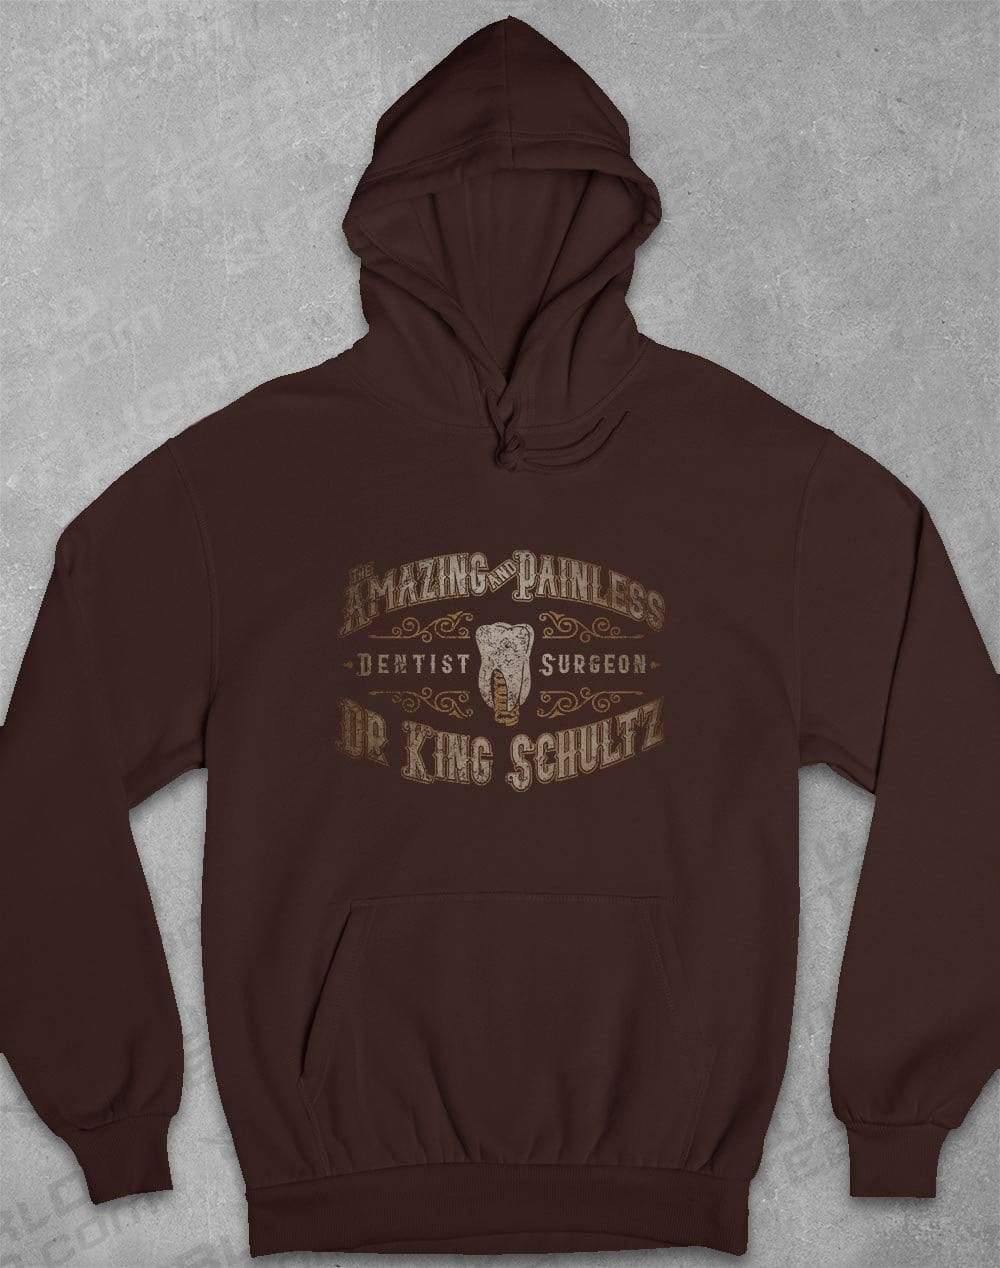 Dr King Schultz Hoodie S / Hot Chocolate  - Off World Tees